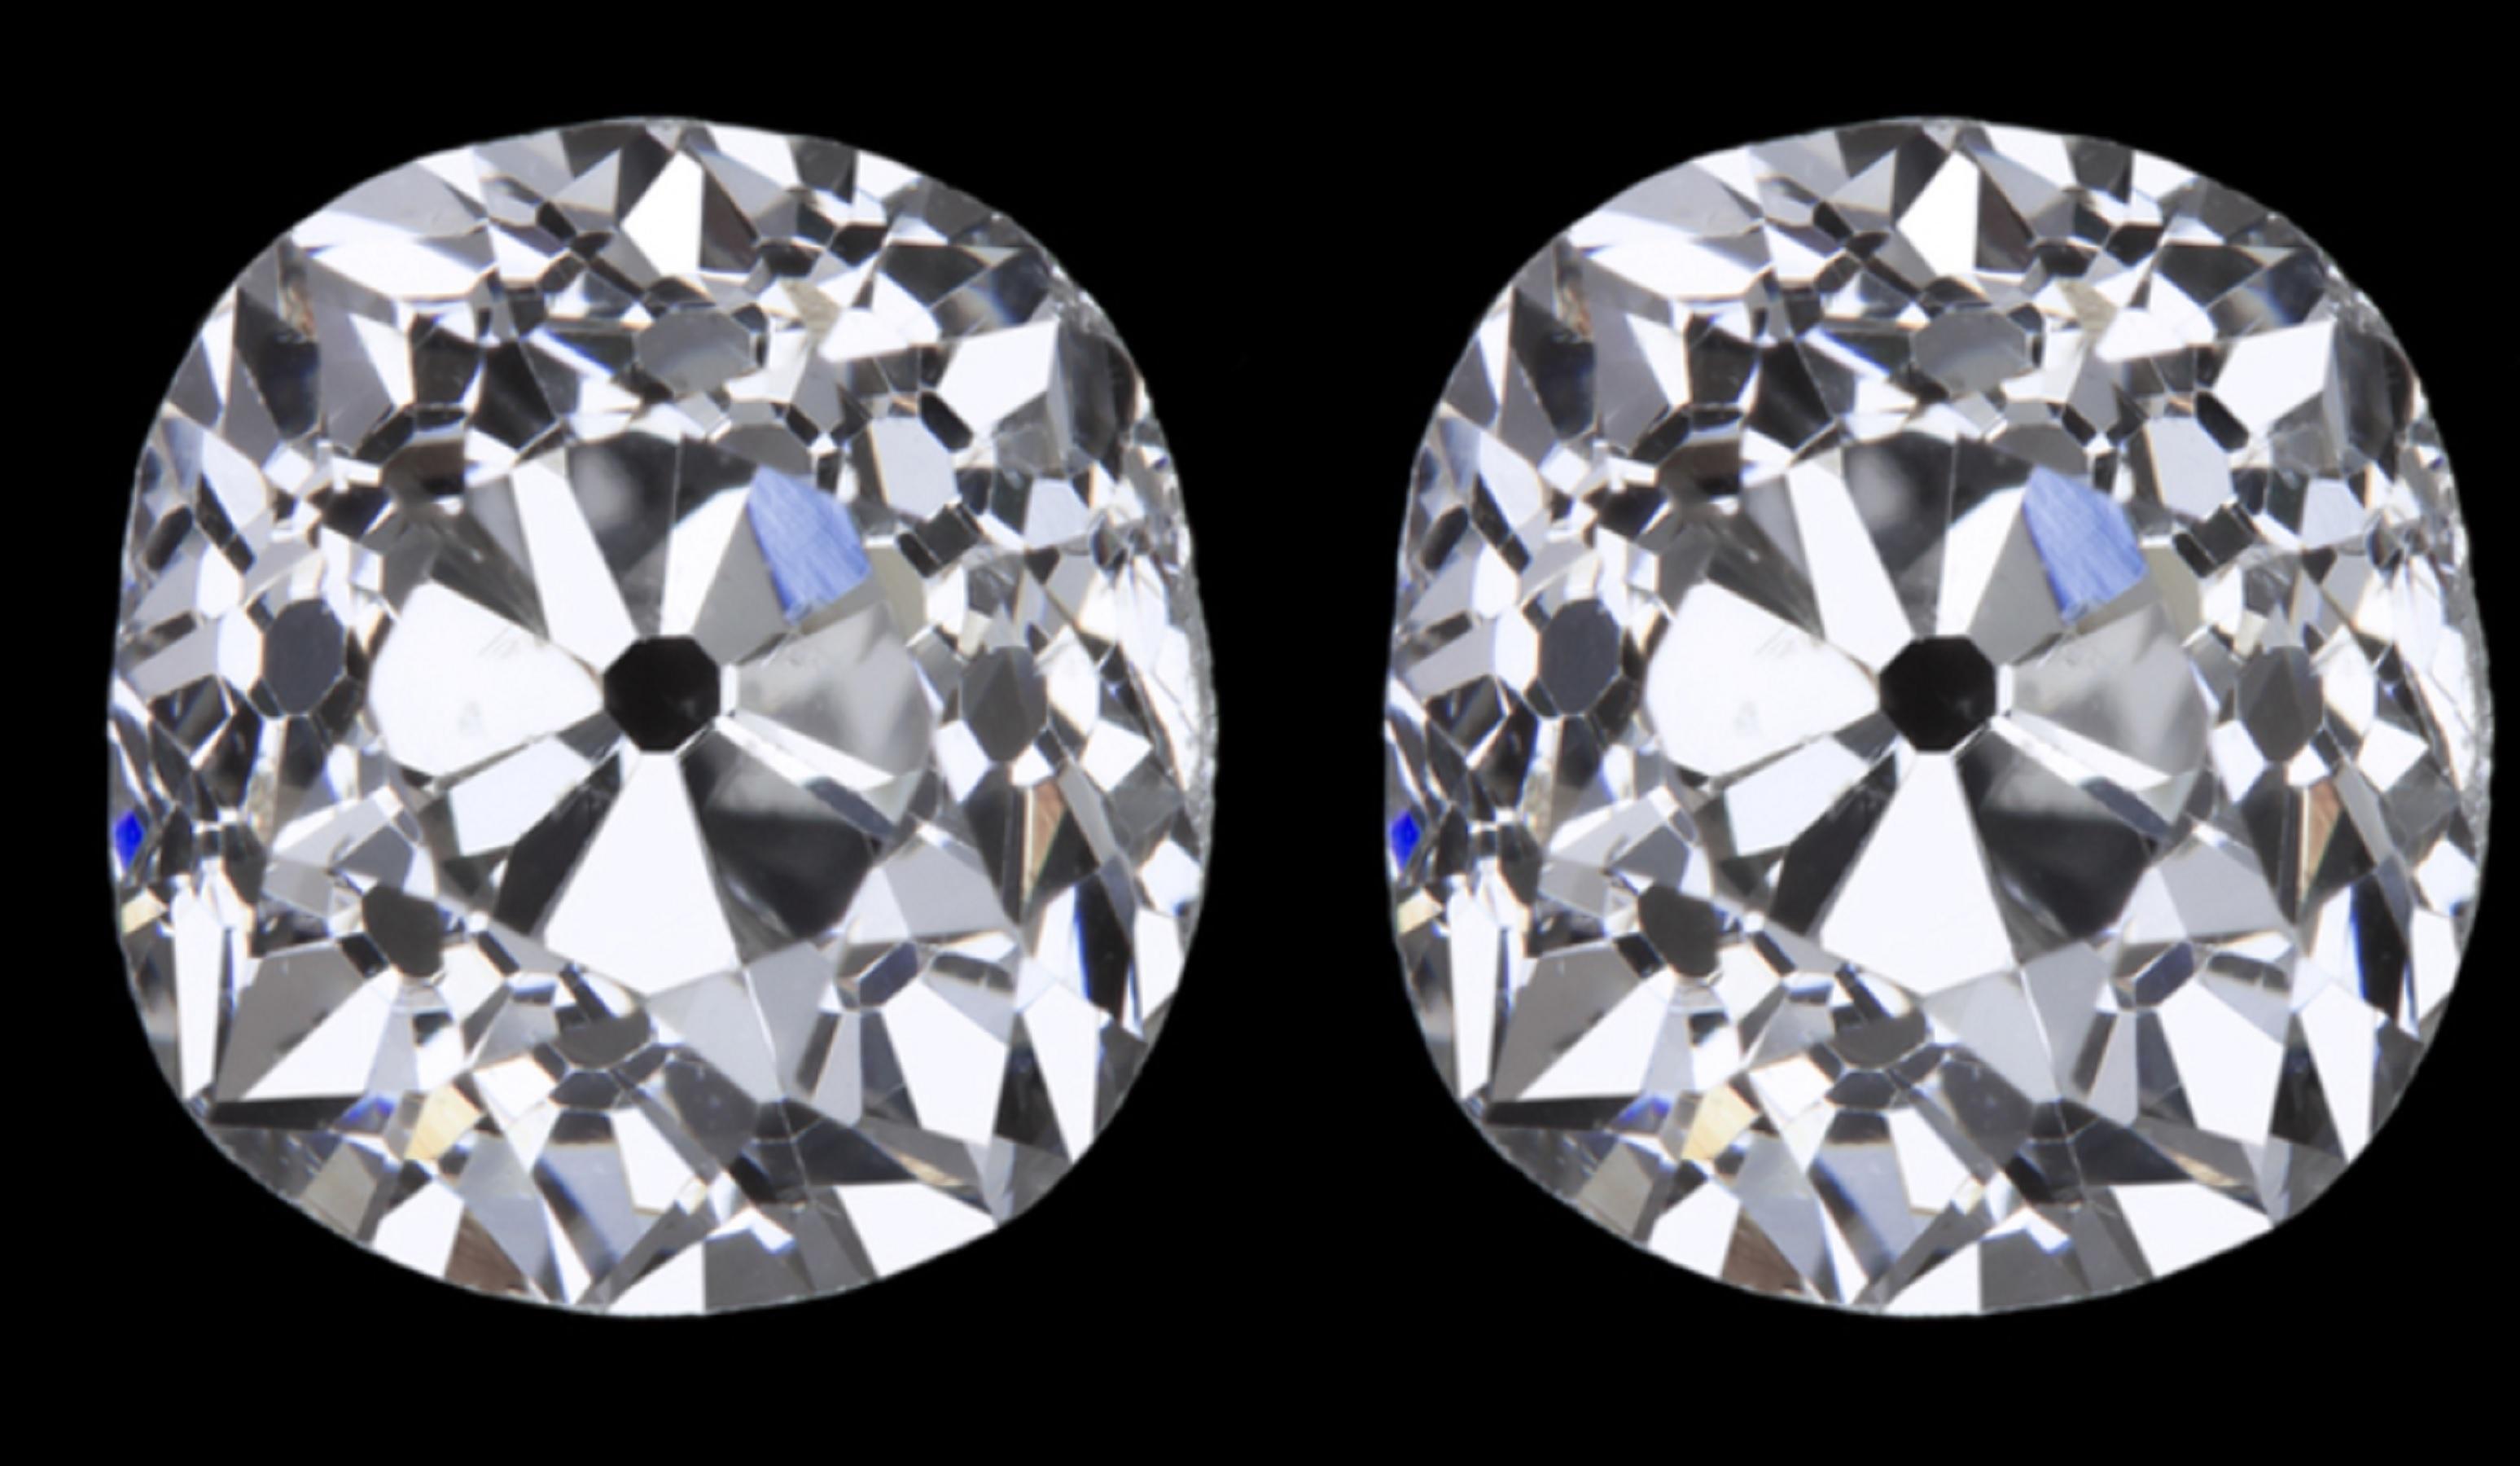 This one of a kind pair of Old European cut diamonds is impressive in size, eye clean in the ear, beautifully white, and truly dazzling with fiery sparkle! Absolutely unique, these beauties are a perfect choice for a beautiful and meaningfully